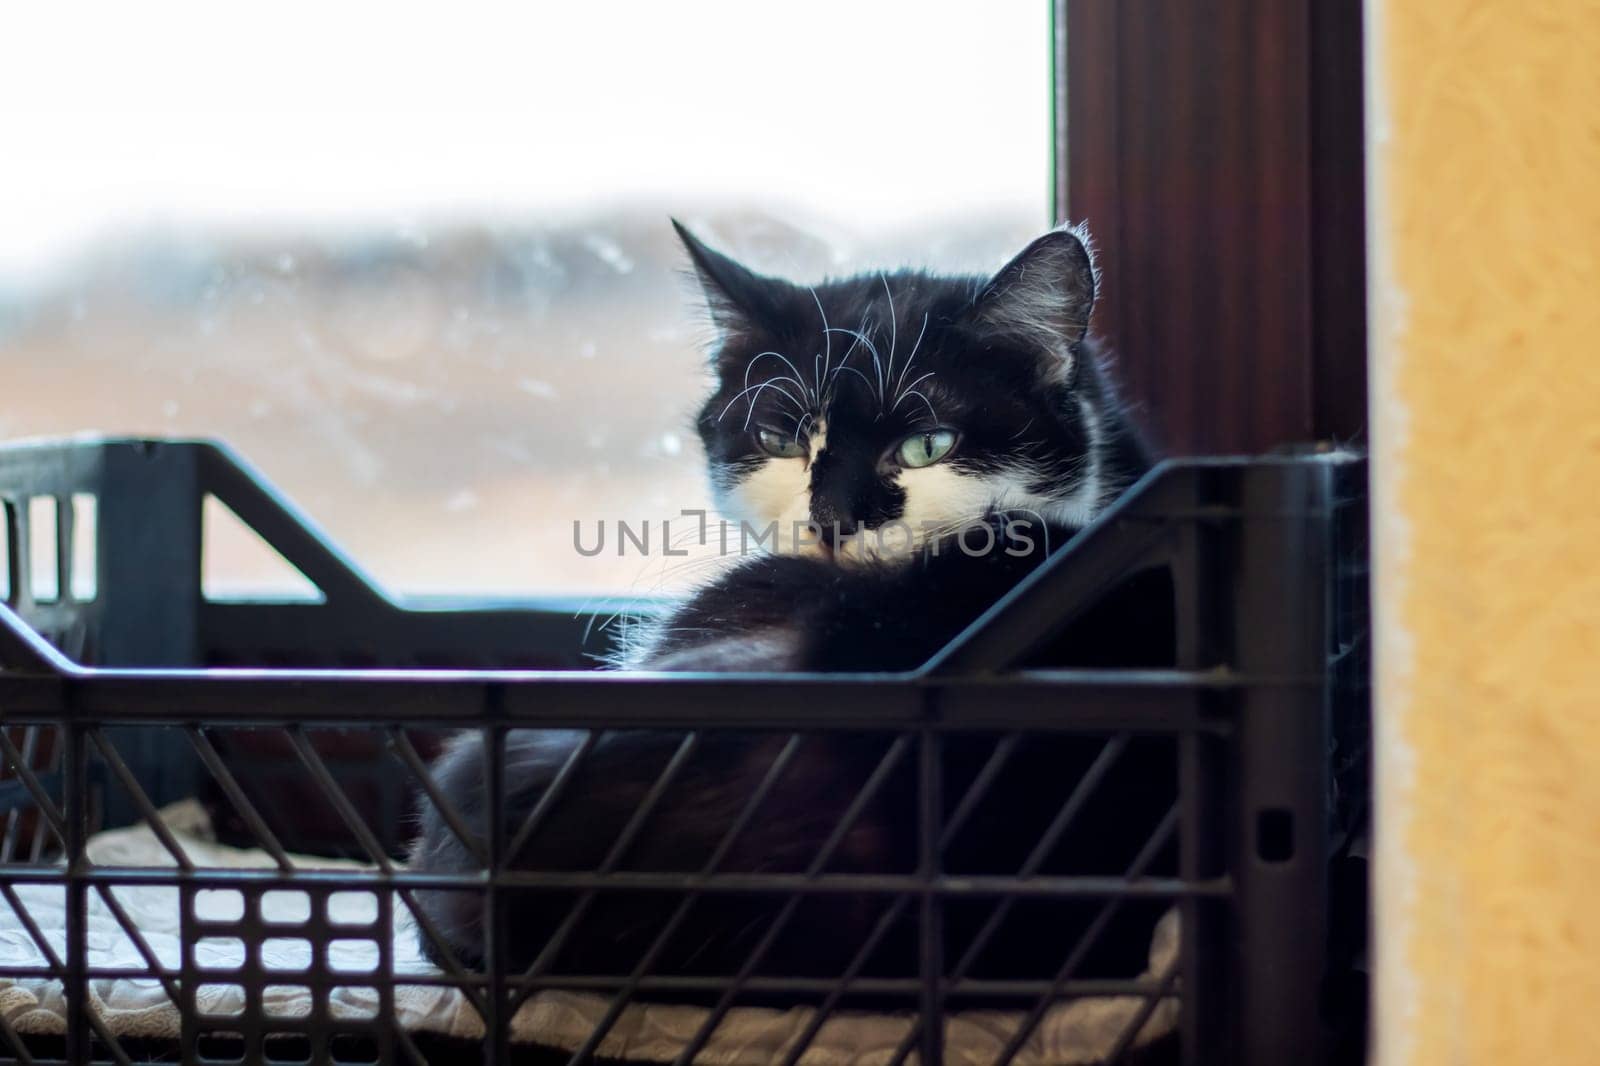 A domestic shorthaired black and white Cat with whiskers and a tail is lounging in a plastic crate by the window, resembling a small to mediumsized Felidae carnivore, overlooking the sky